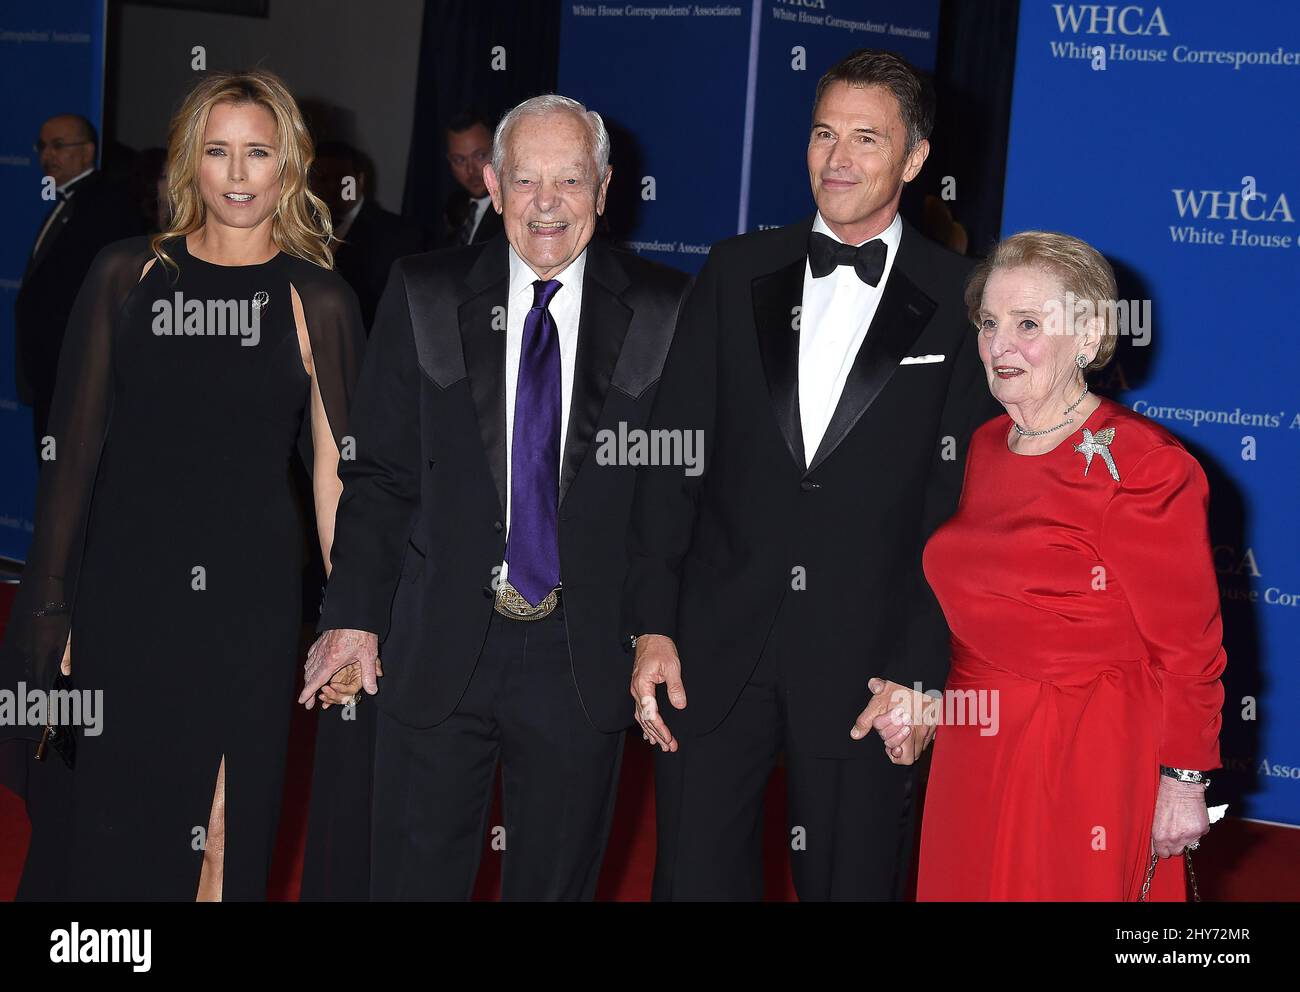 Tea Leoni, Bob Woodard, Tim Daly & Madeline Albright attends the White House Correspondents Association Dinner 2015 held at the Hilton Hotel. Stock Photo